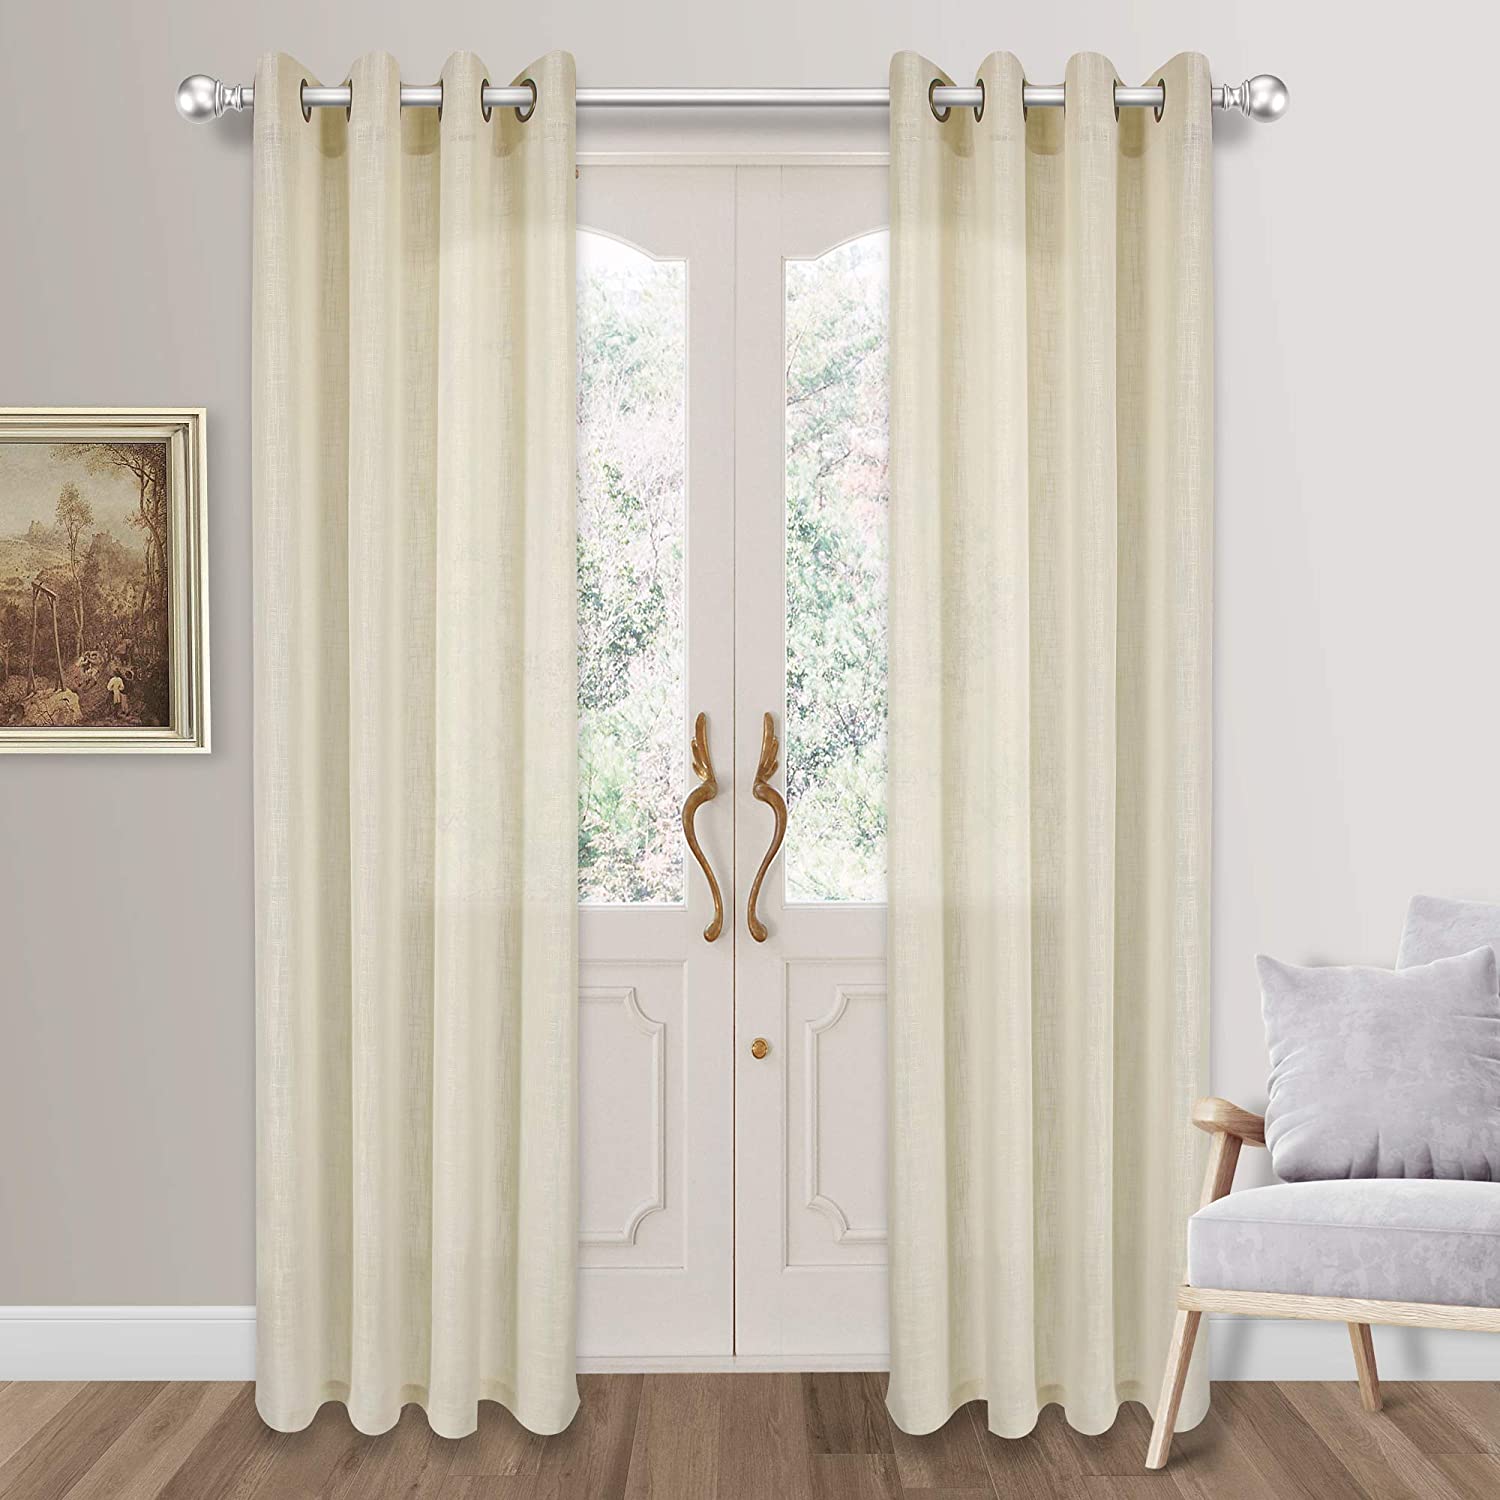 Don’t Say “No” to Sheer Curtain Too Easily